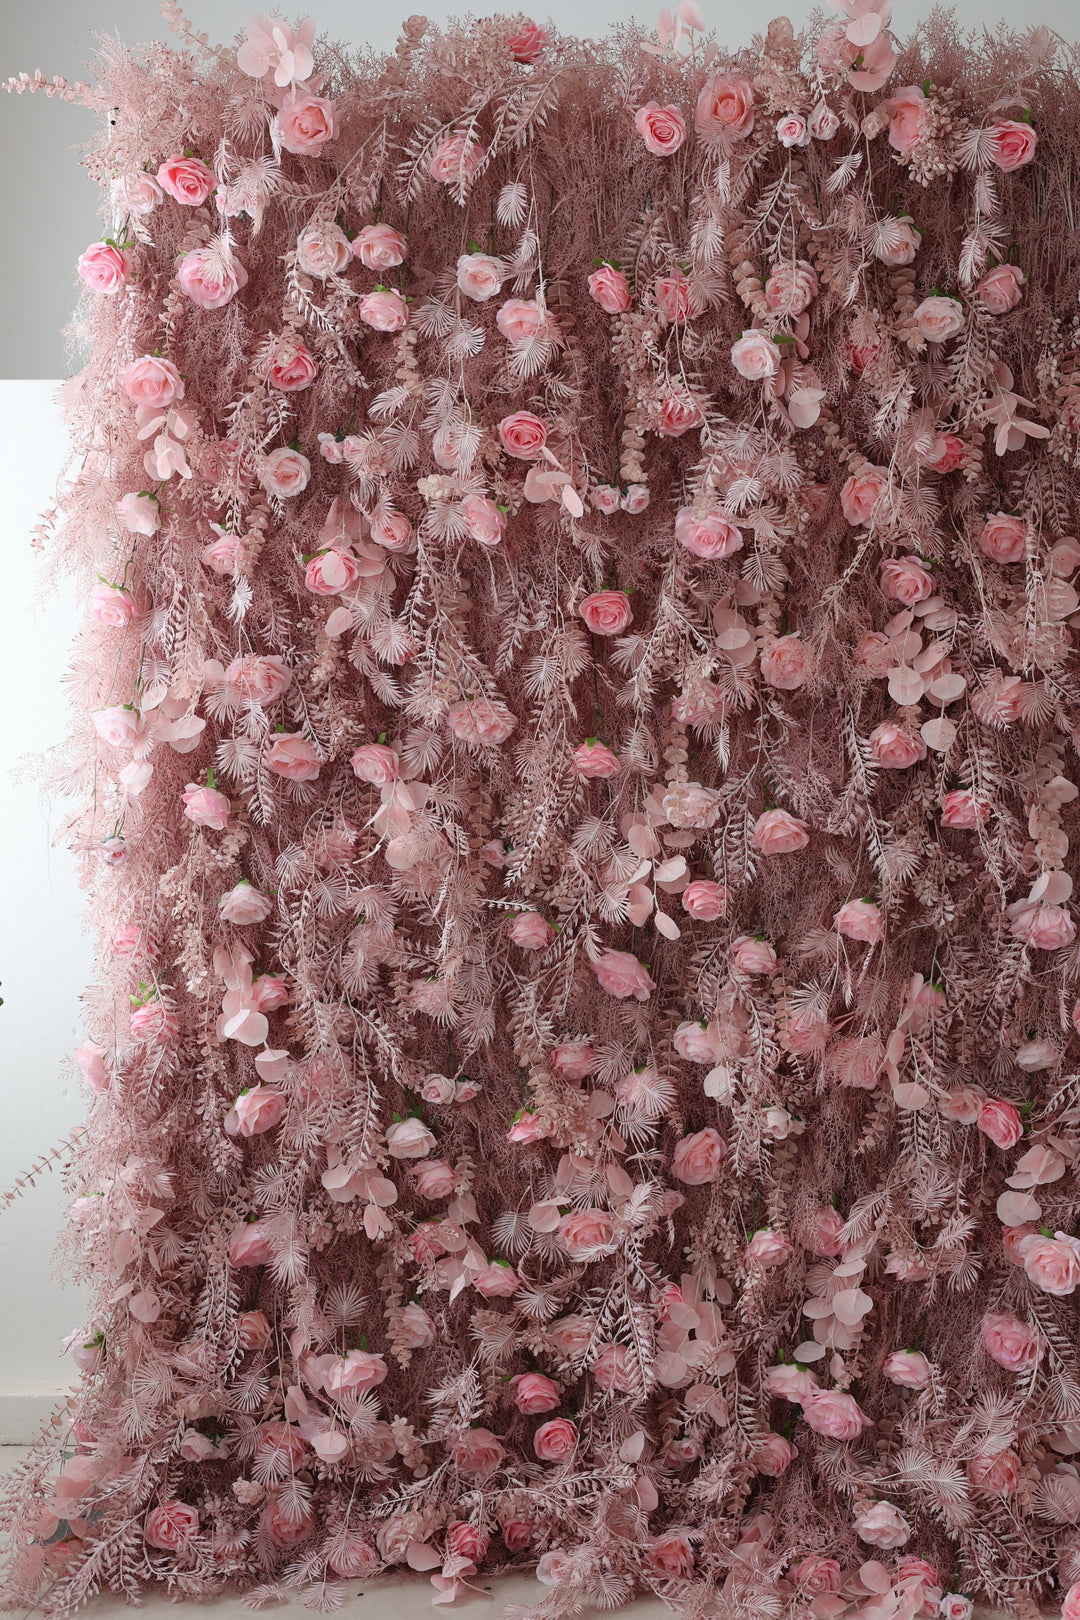 Pink Roses And Silk Fern, Artificial Flower Wall, Wedding Party Backdrop